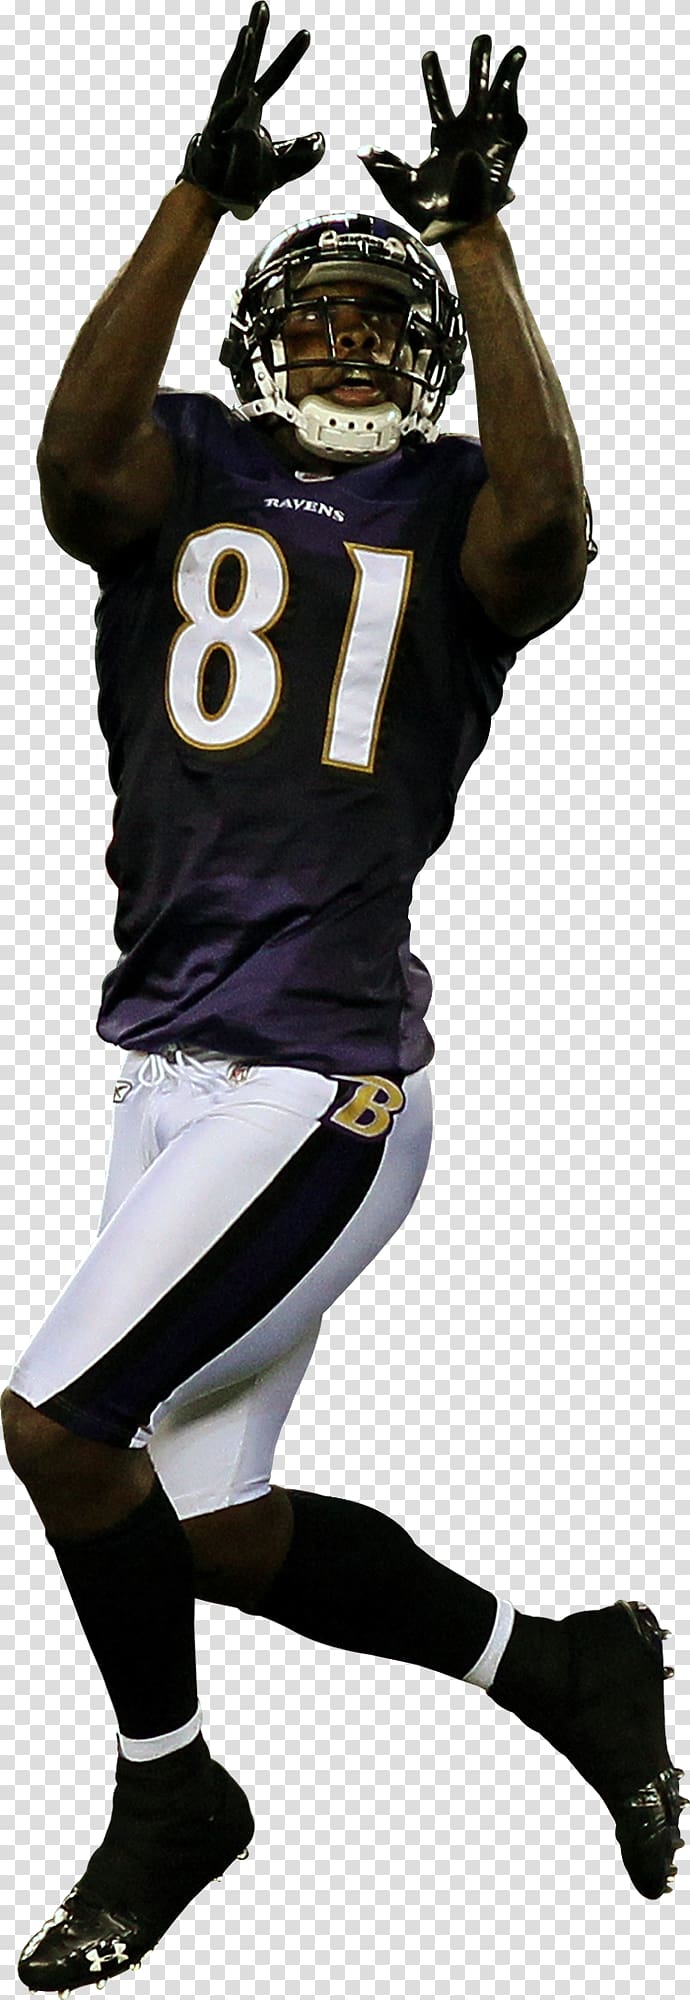 Protective gear in sports Baltimore Ravens Sportswear, bachelor raven transparent background PNG clipart